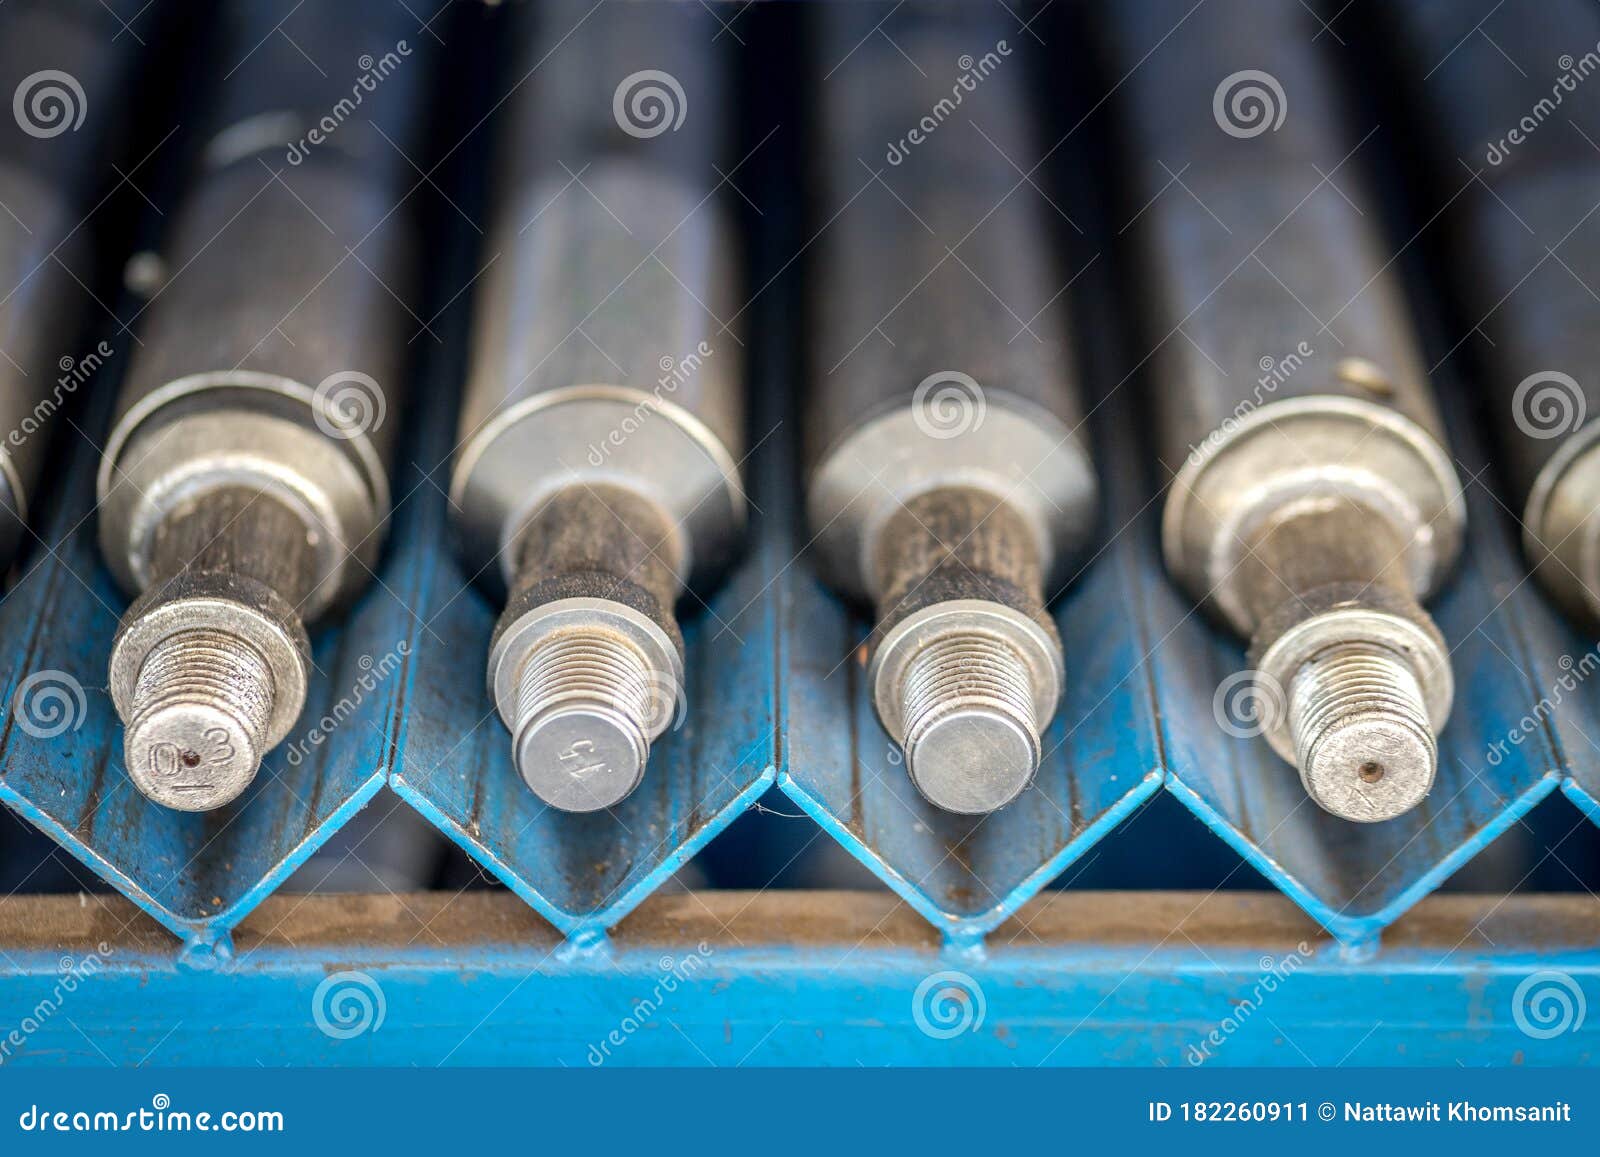 Tool Storage for Oil and Gas Operation. Stock Image - Image of